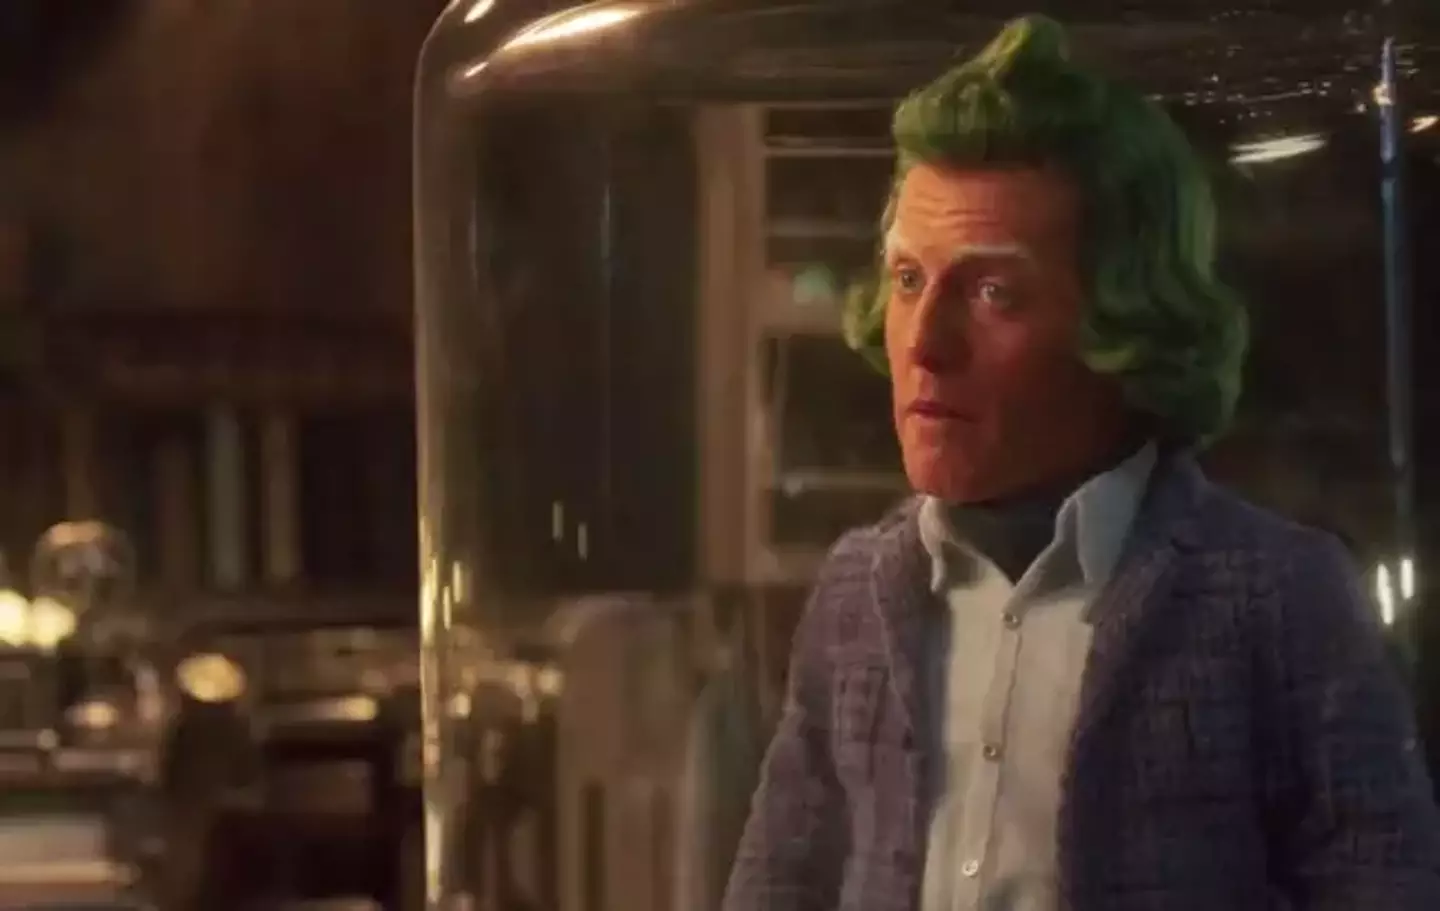 Hugh Grant says he ‘hated’ playing an Oompa Loompa in the new Willy Wonka film.